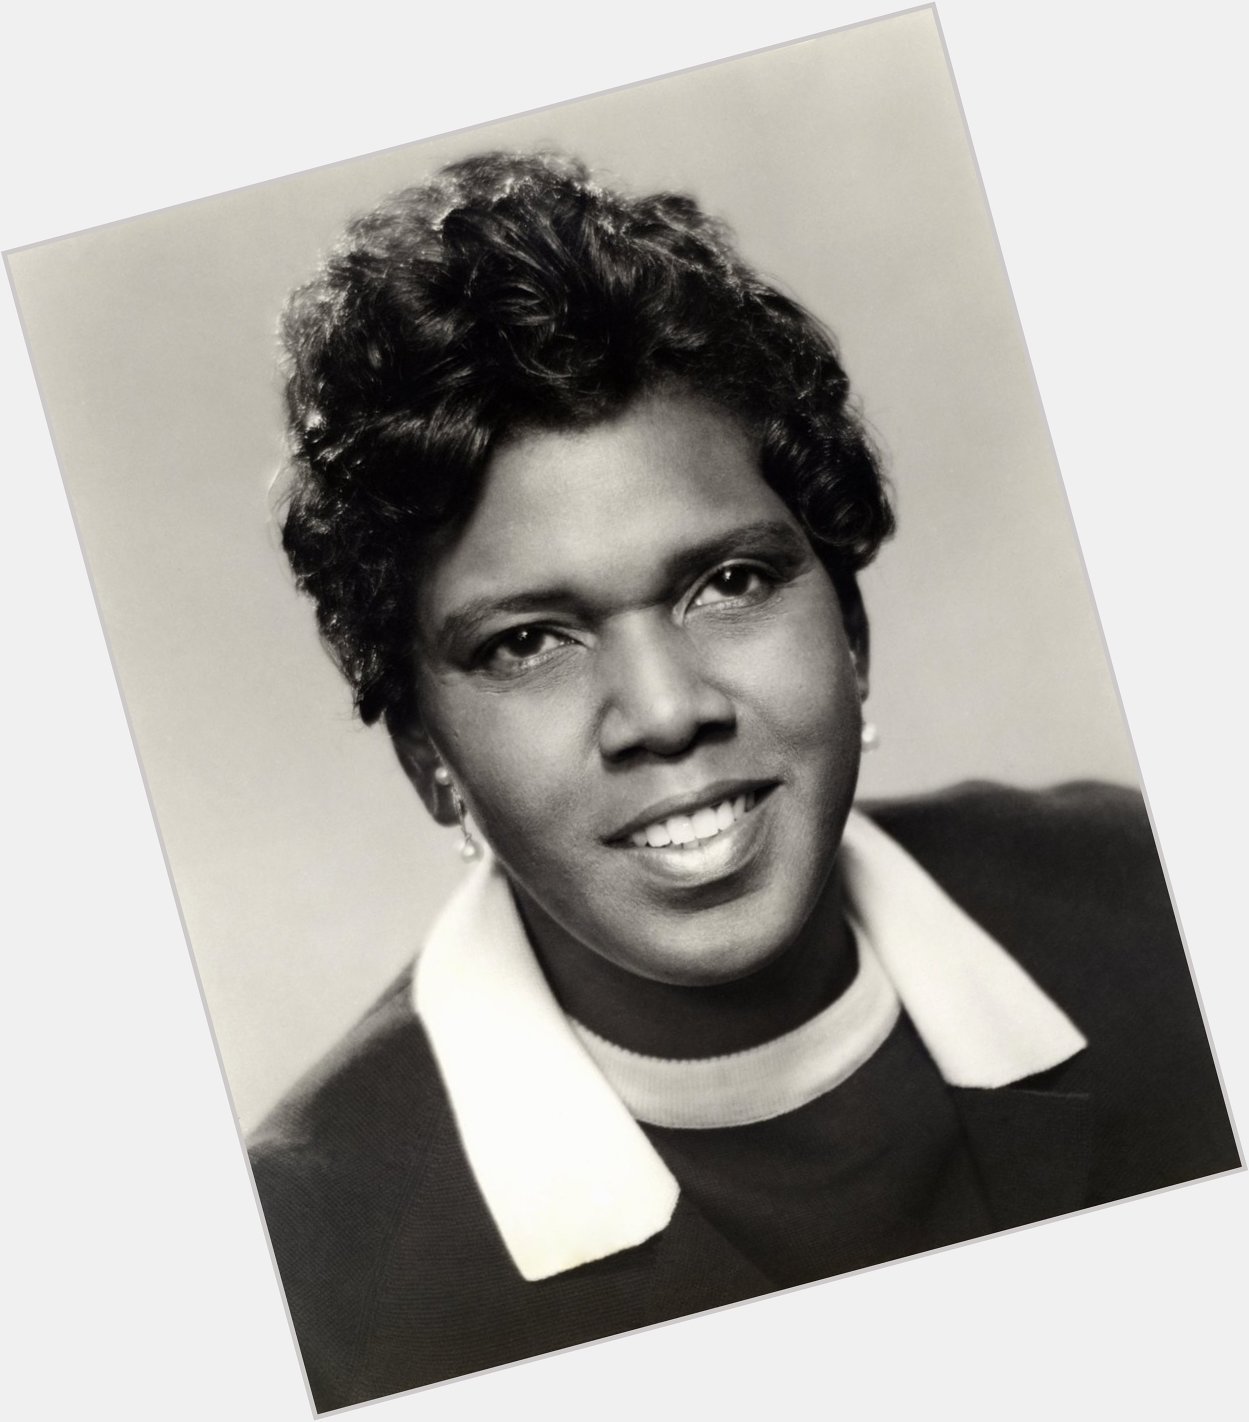 Happy birthday to the indomitable Barbara Jordan, who would have been 83 today. 